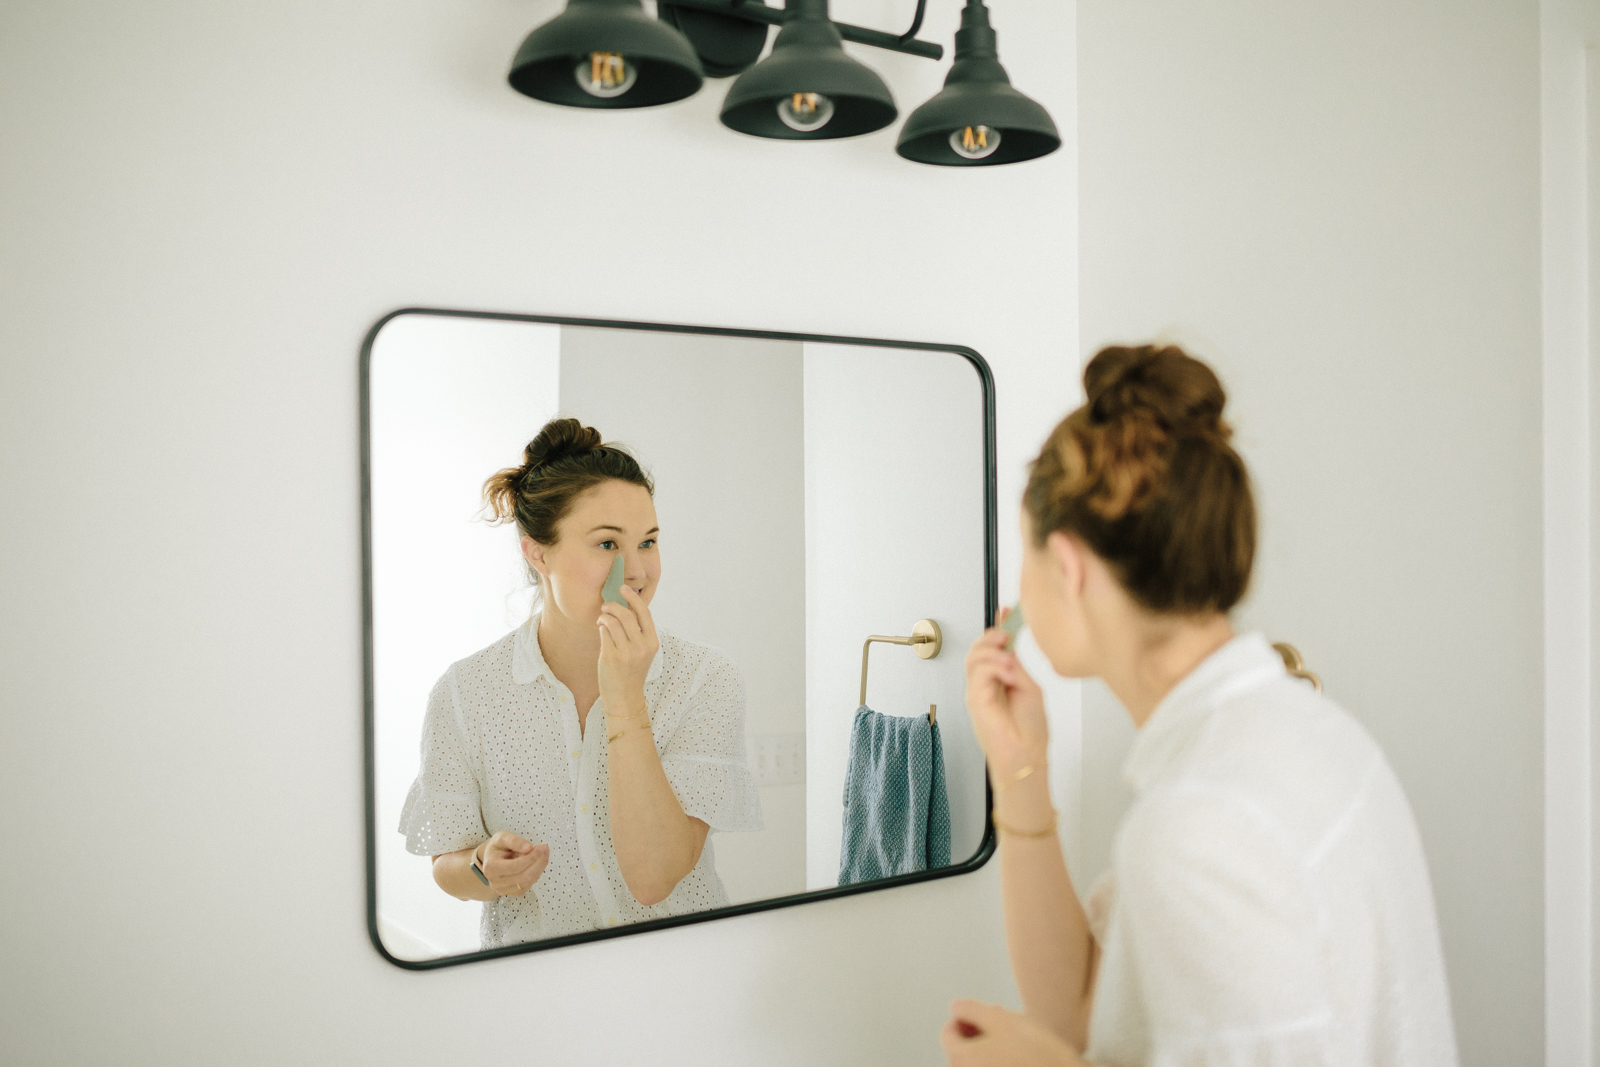 Carolina showing the benefits of gua sha techniques in the mirror.